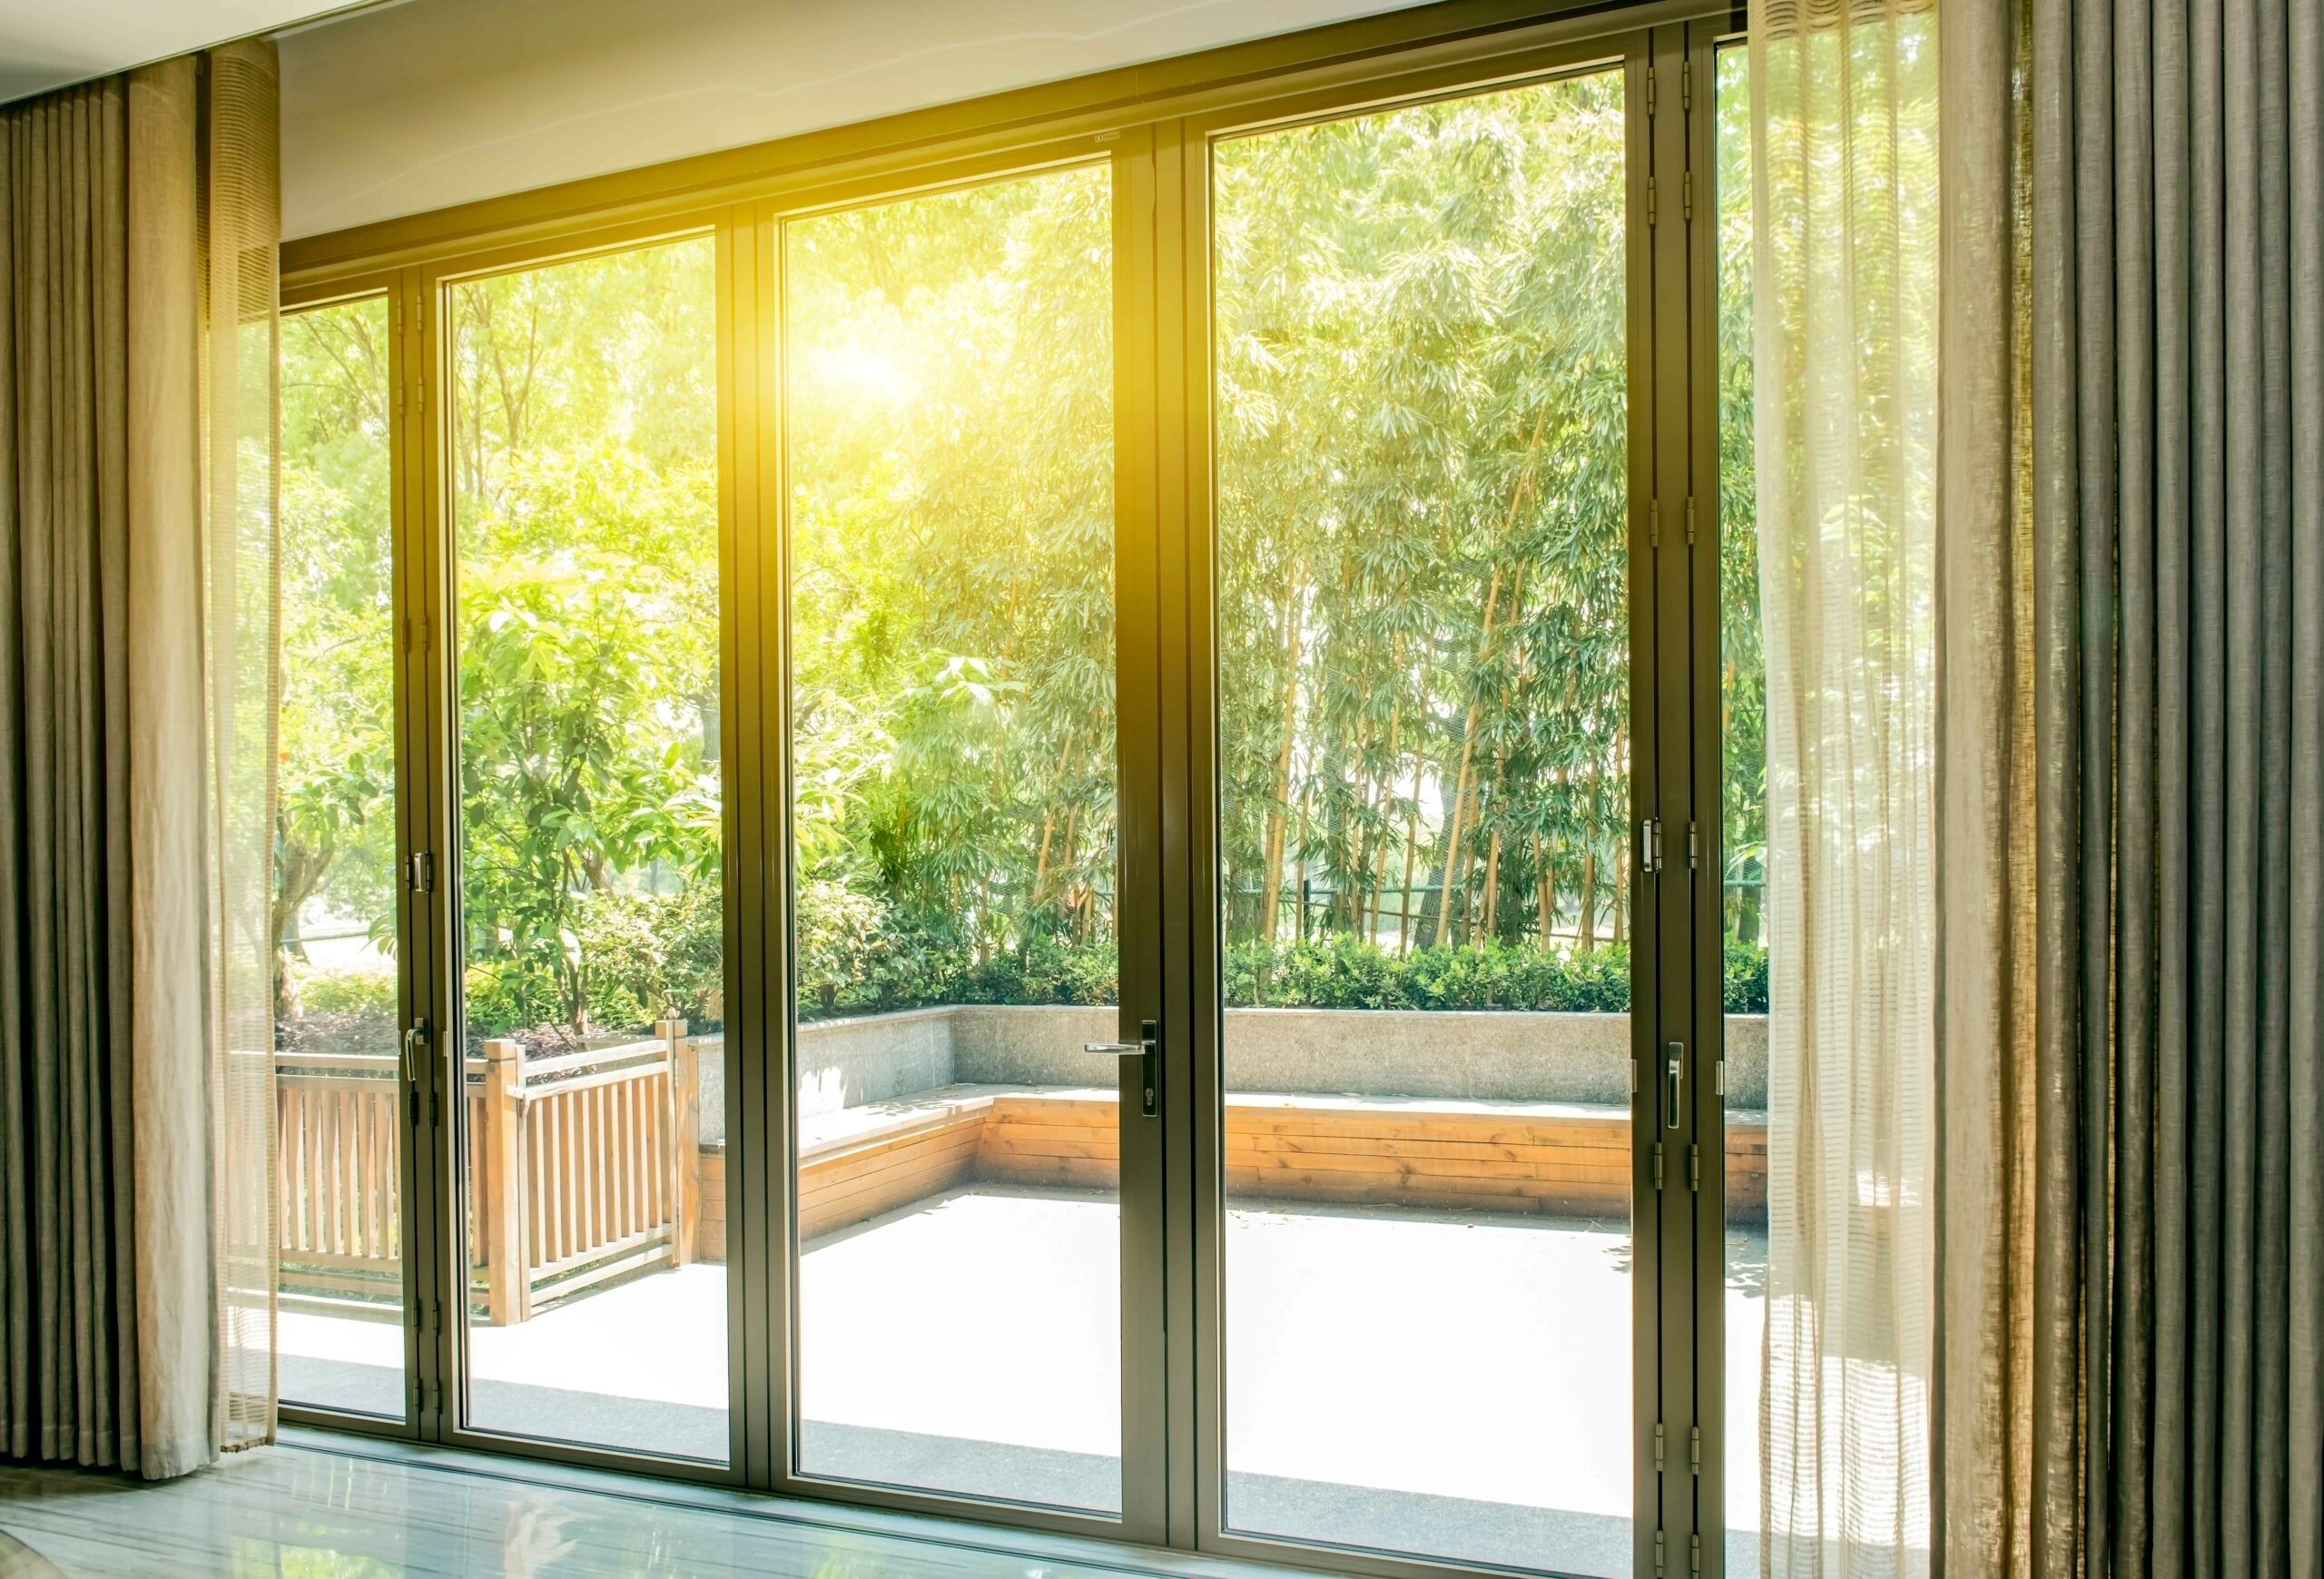 Check Why Aluminium Doors are Best For Your Home Interior